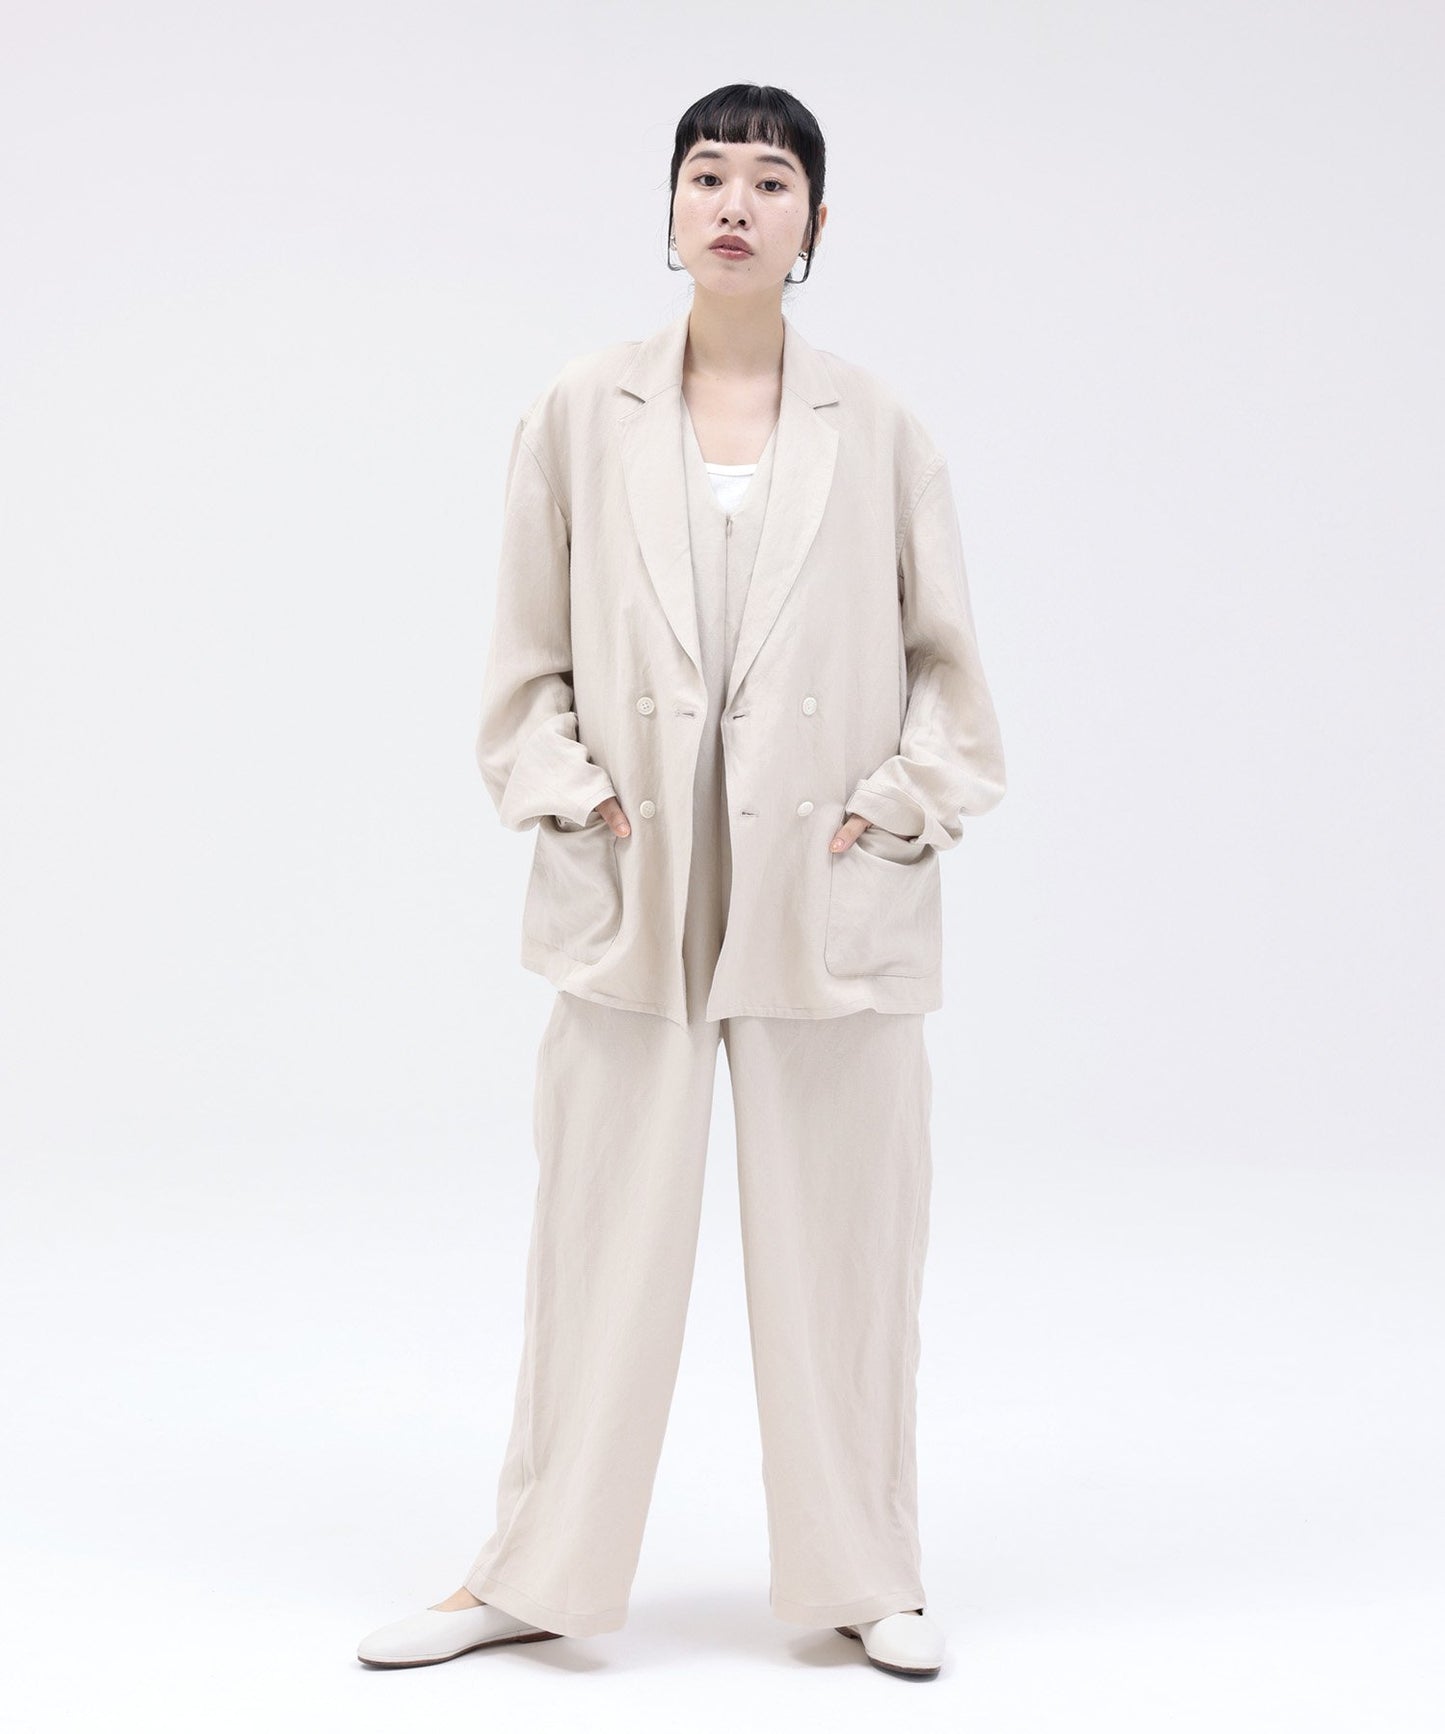 《Environmentally friendly material》LINEN/RAYON V/N SALOPETTE Cool touch feeling On/off use Setup compatible [145-165cm]